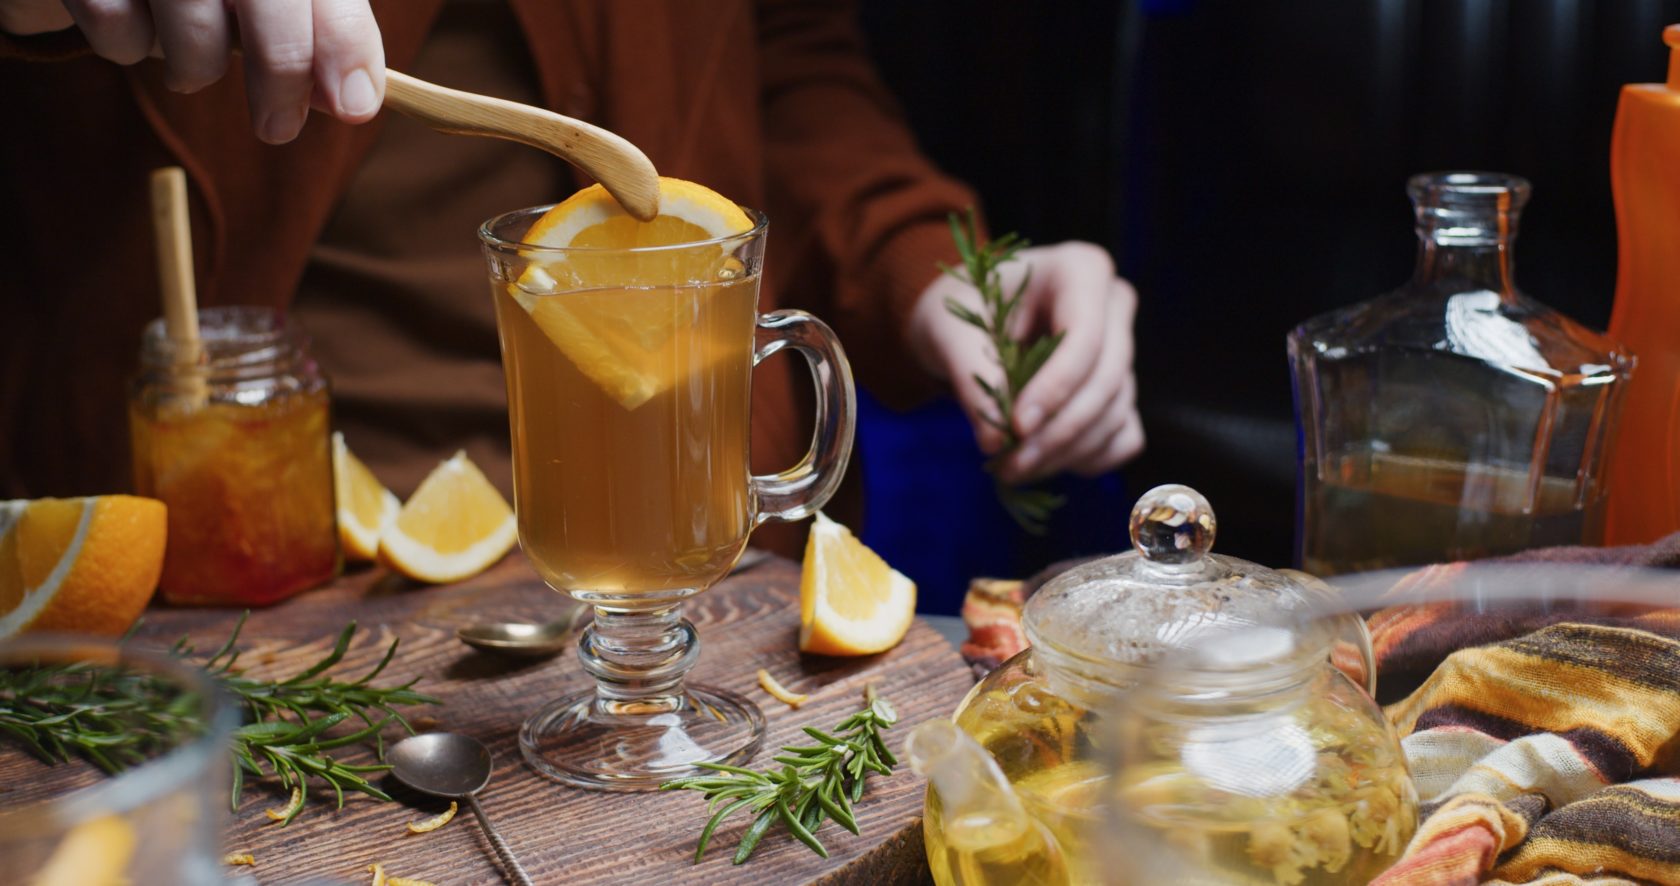 Human hands are preparing hot toddy with orange, rosemary and chamomile tea. Medium view